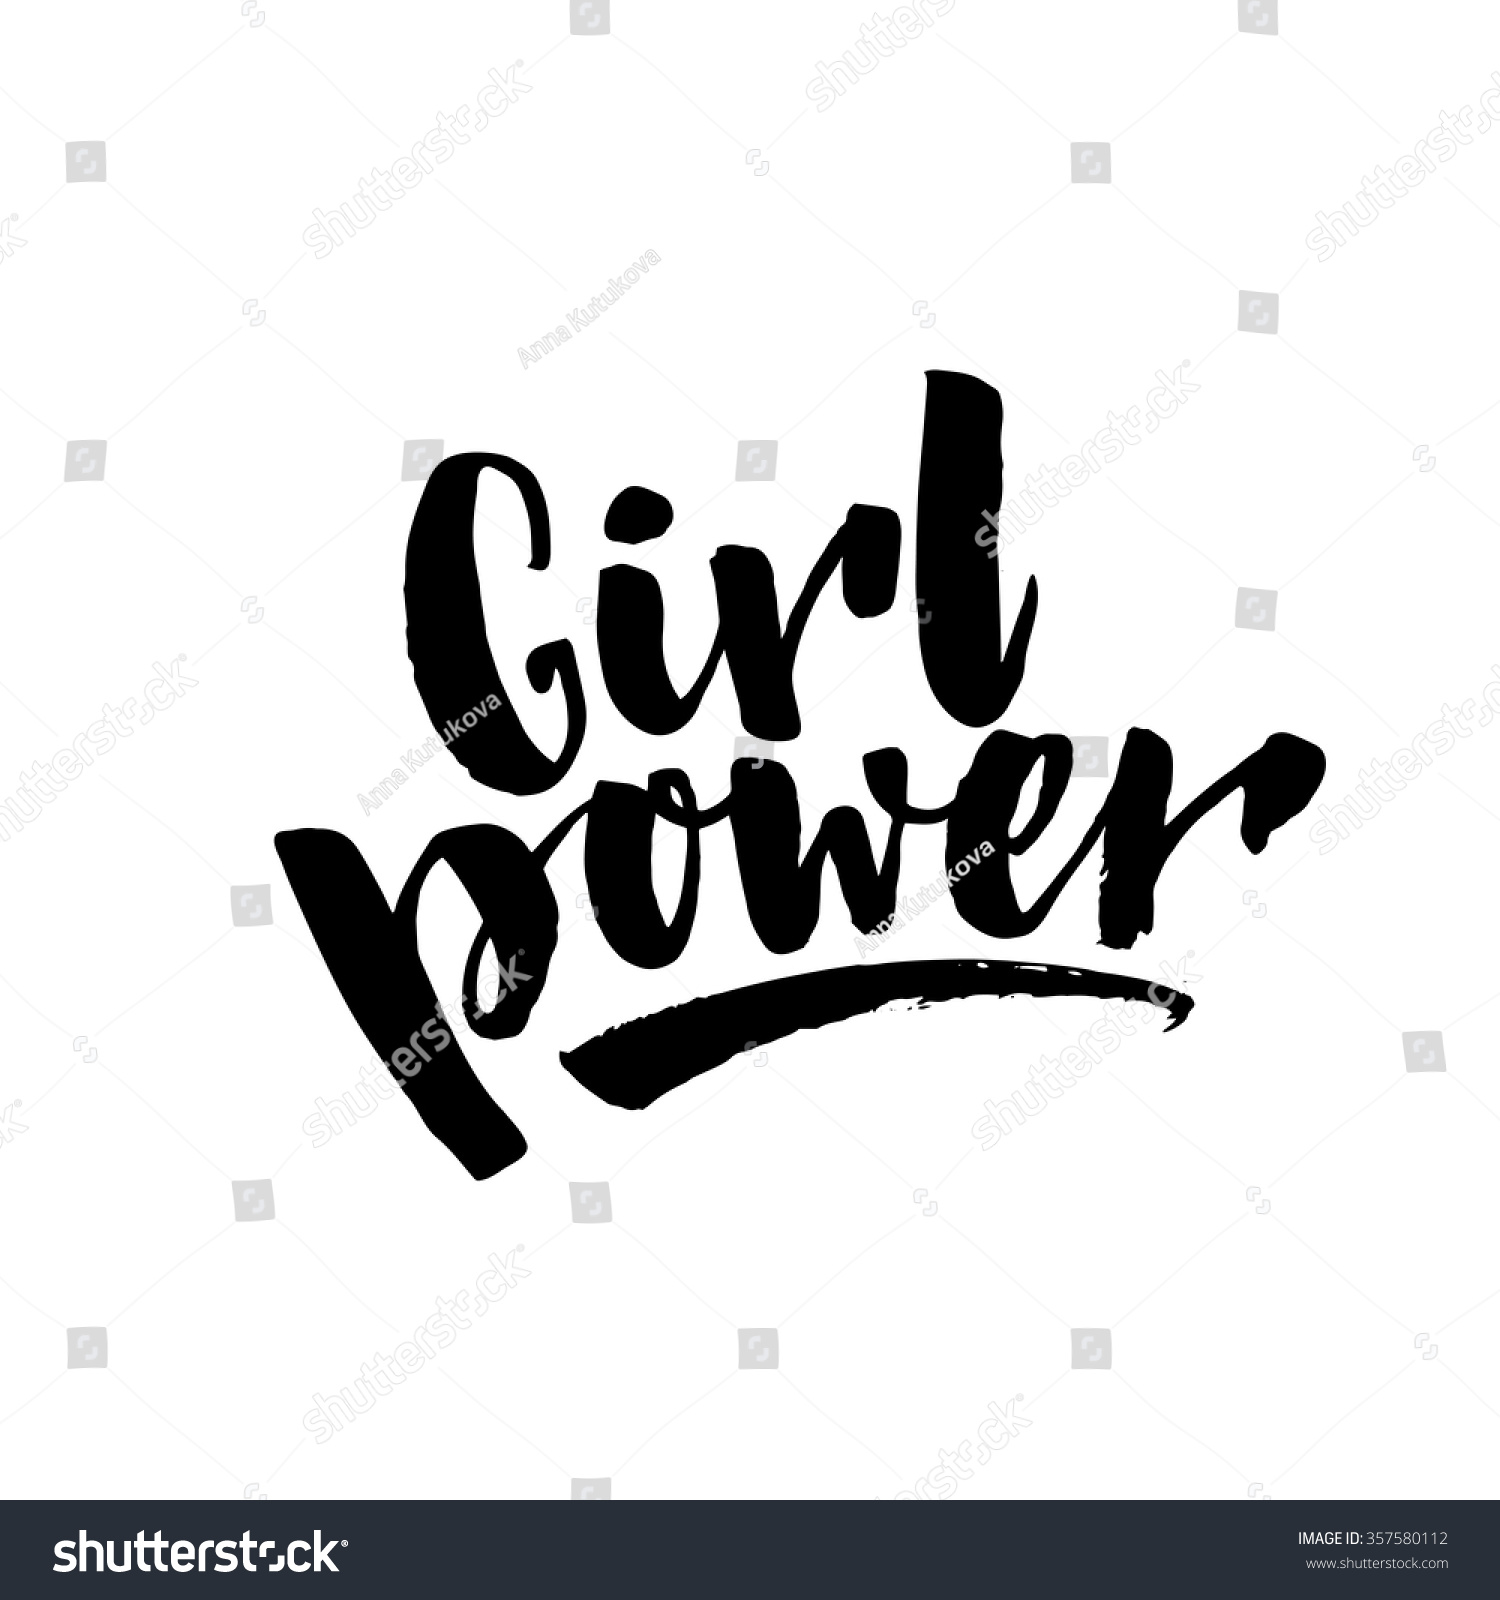 girl power clipart free - photo #27